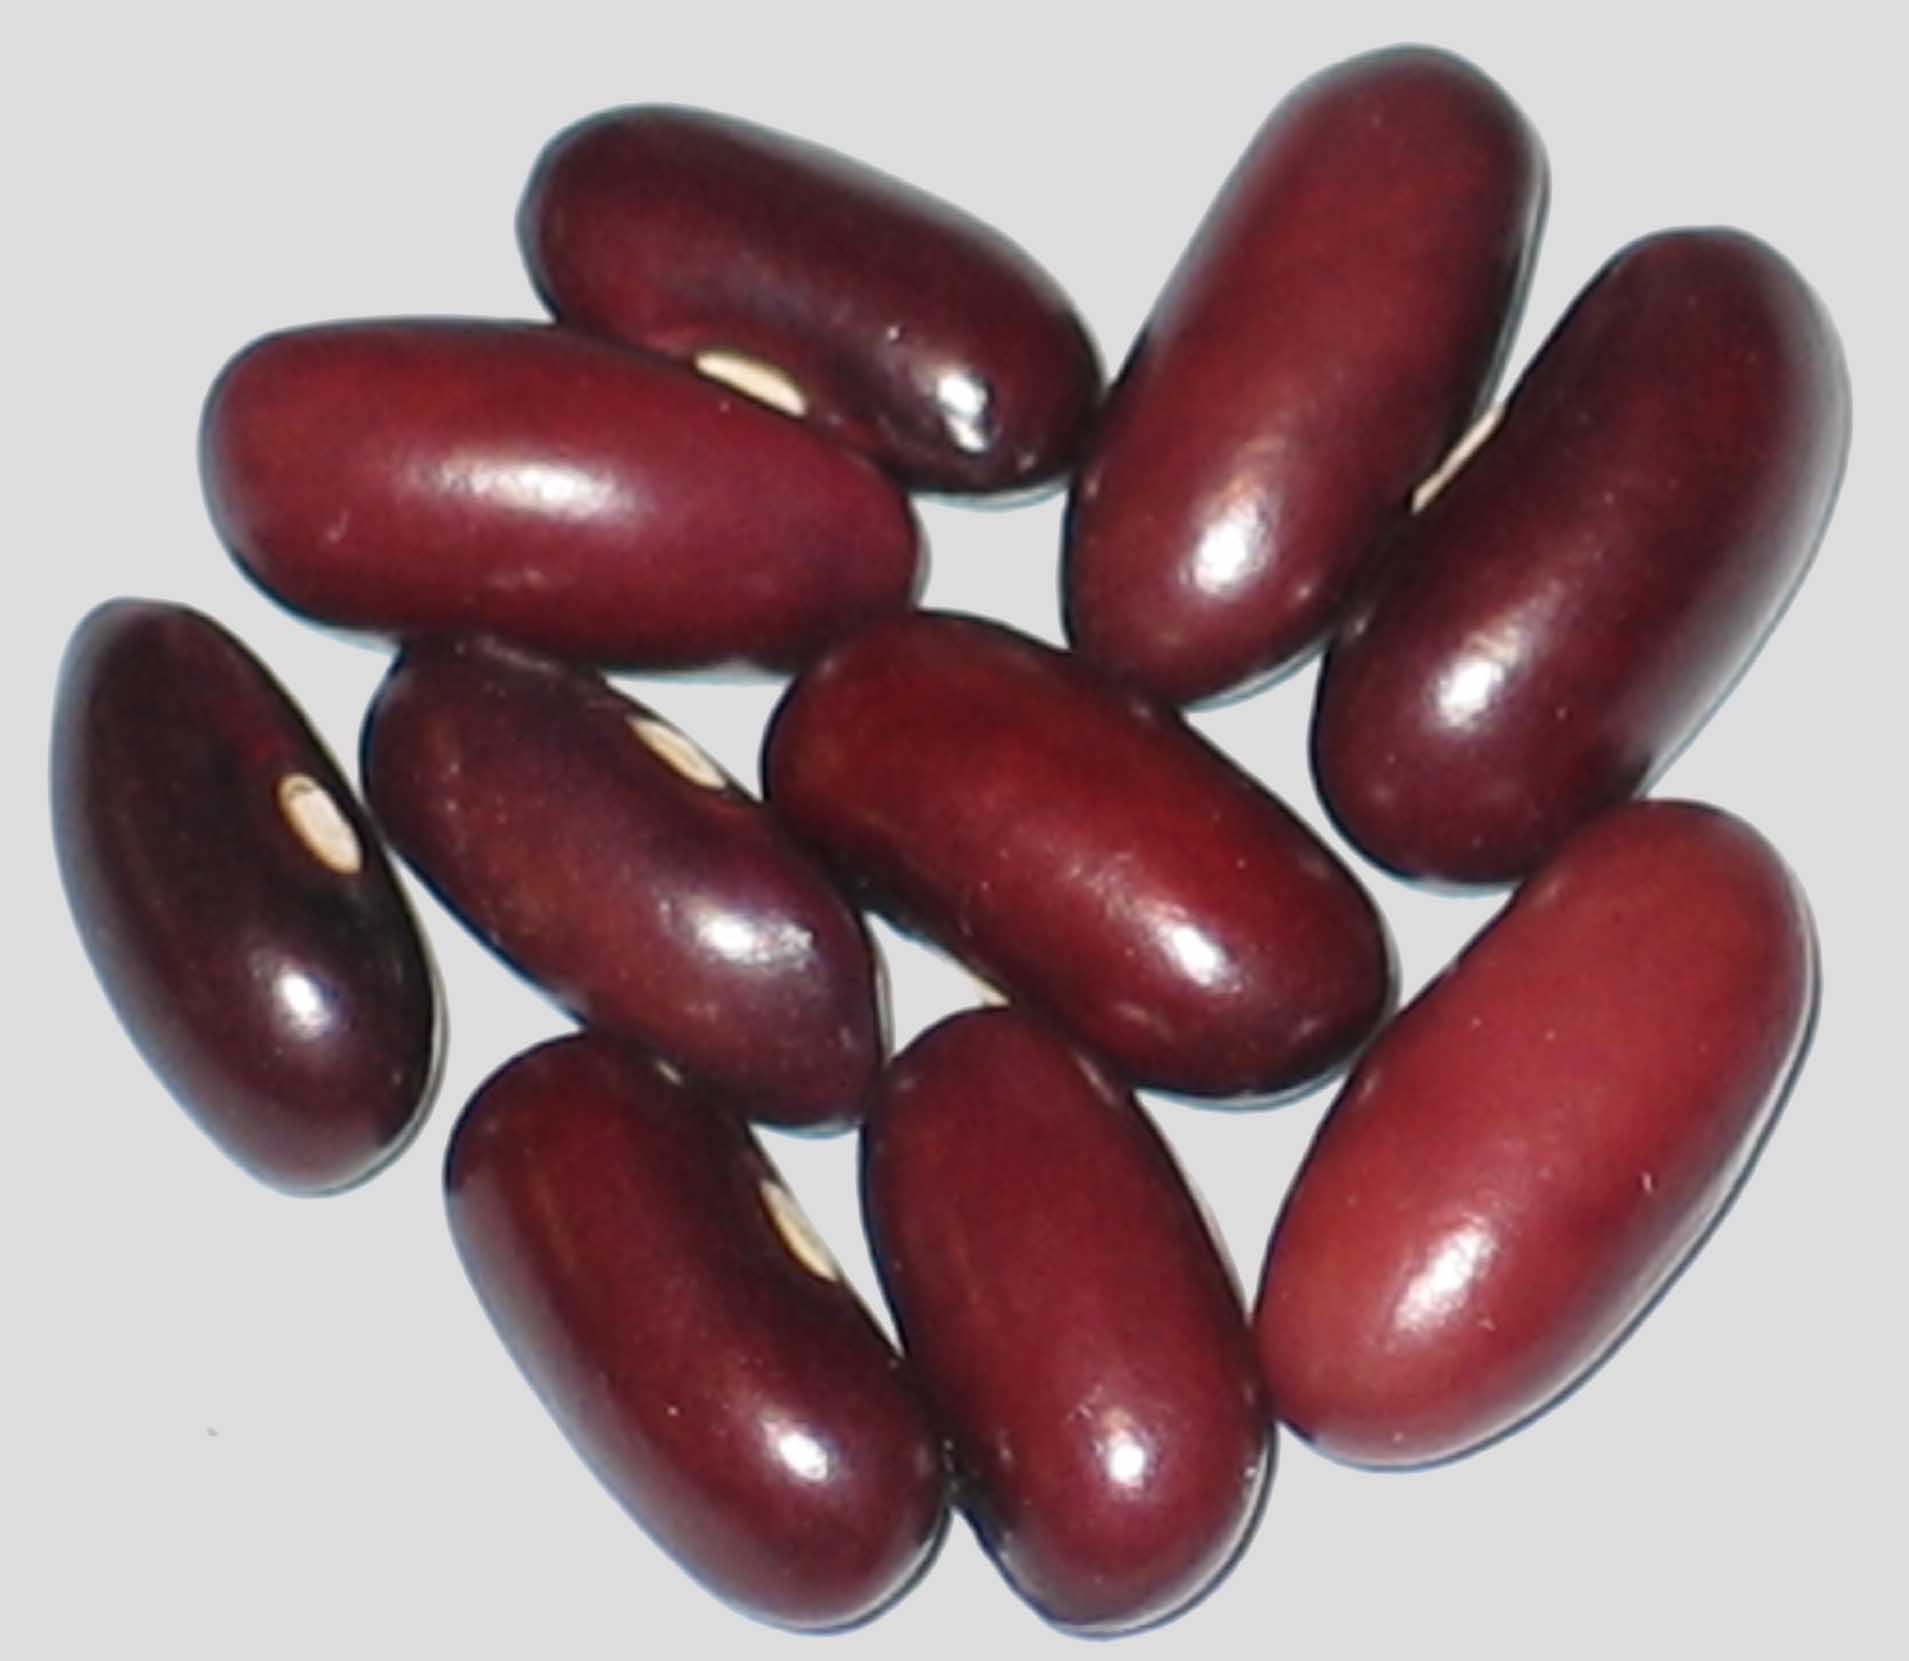 image of Johns Best beans